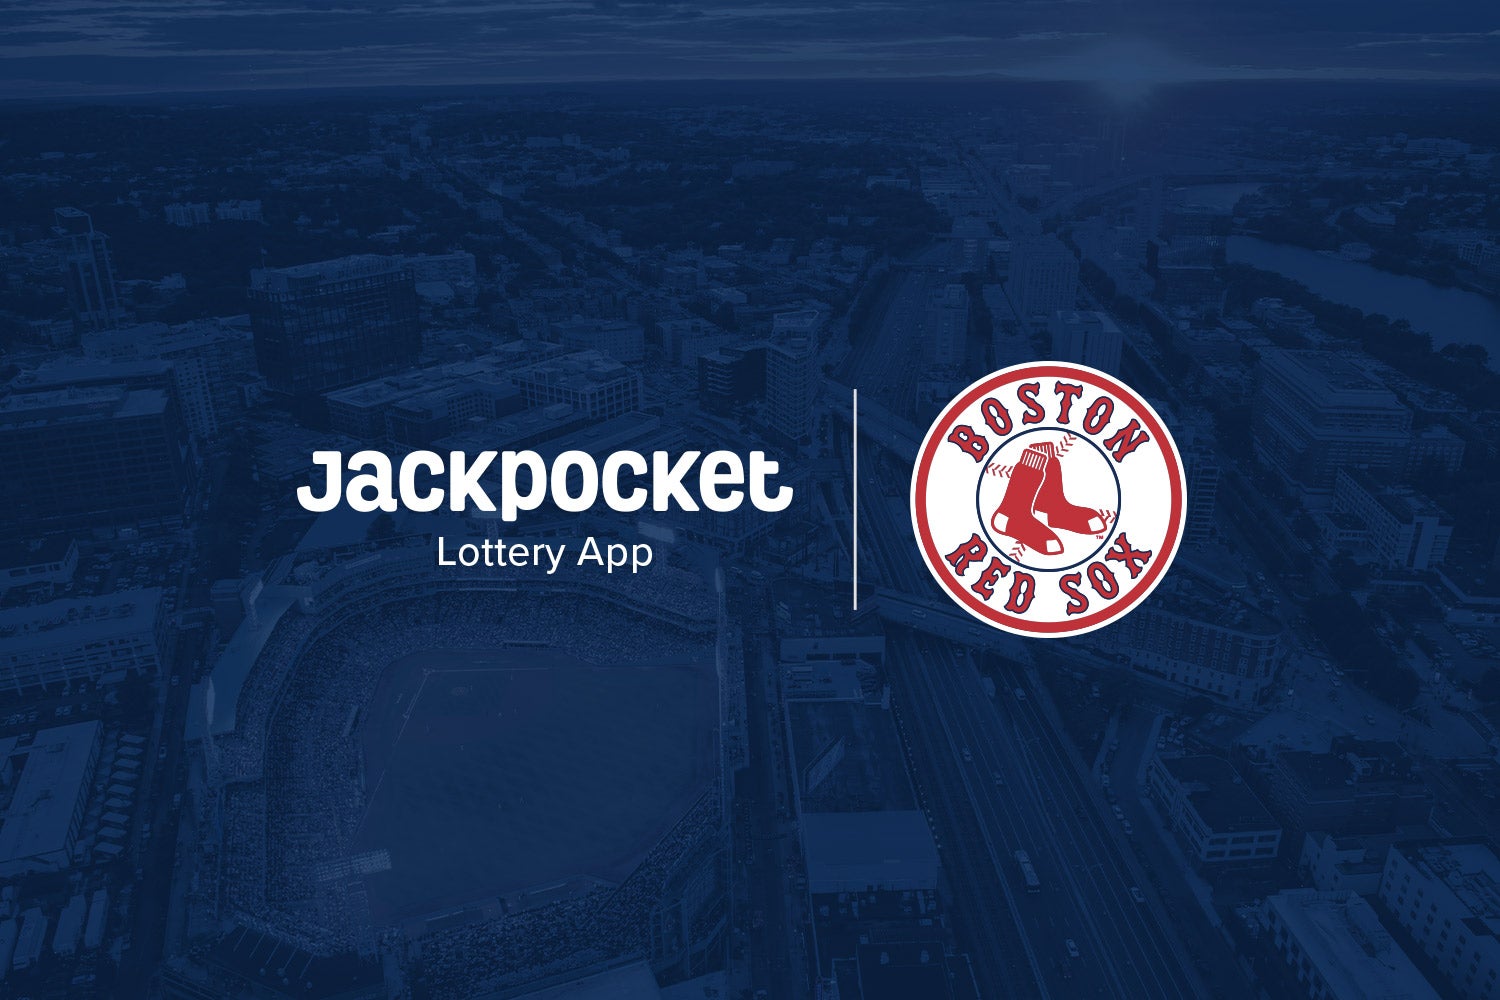 jackpocket and boston red sox